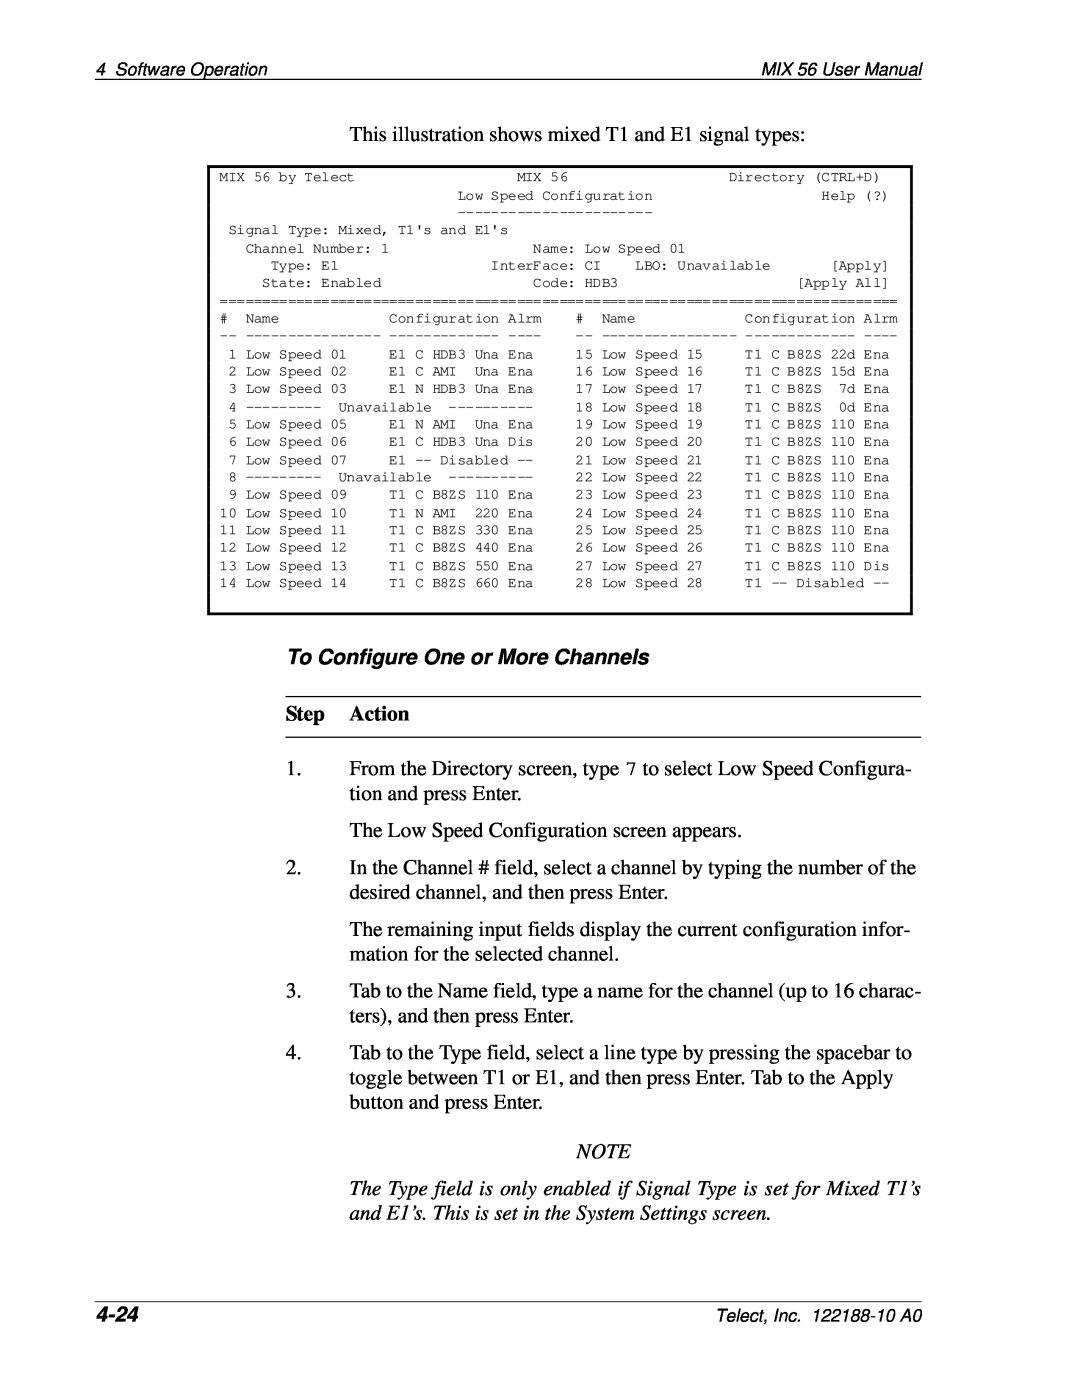 Telect MIX 56 user manual To Configure One or More Channels, 4-24, Step Action 